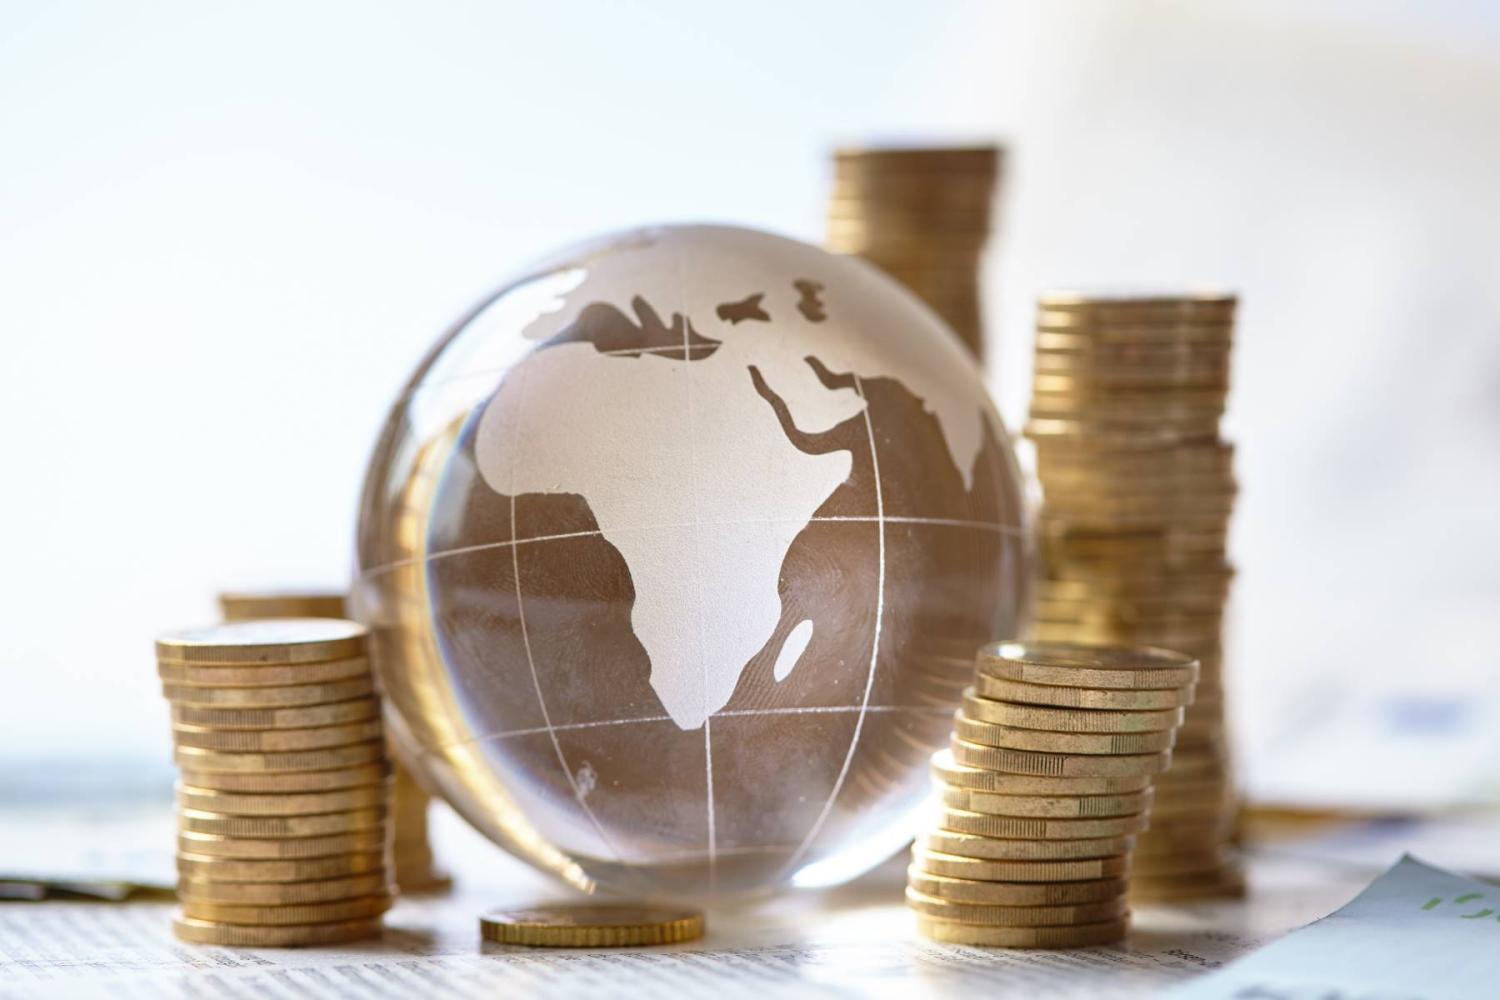 Coins piled around a globe featuring Africa (Photo credit: allstars / Shutterstock)